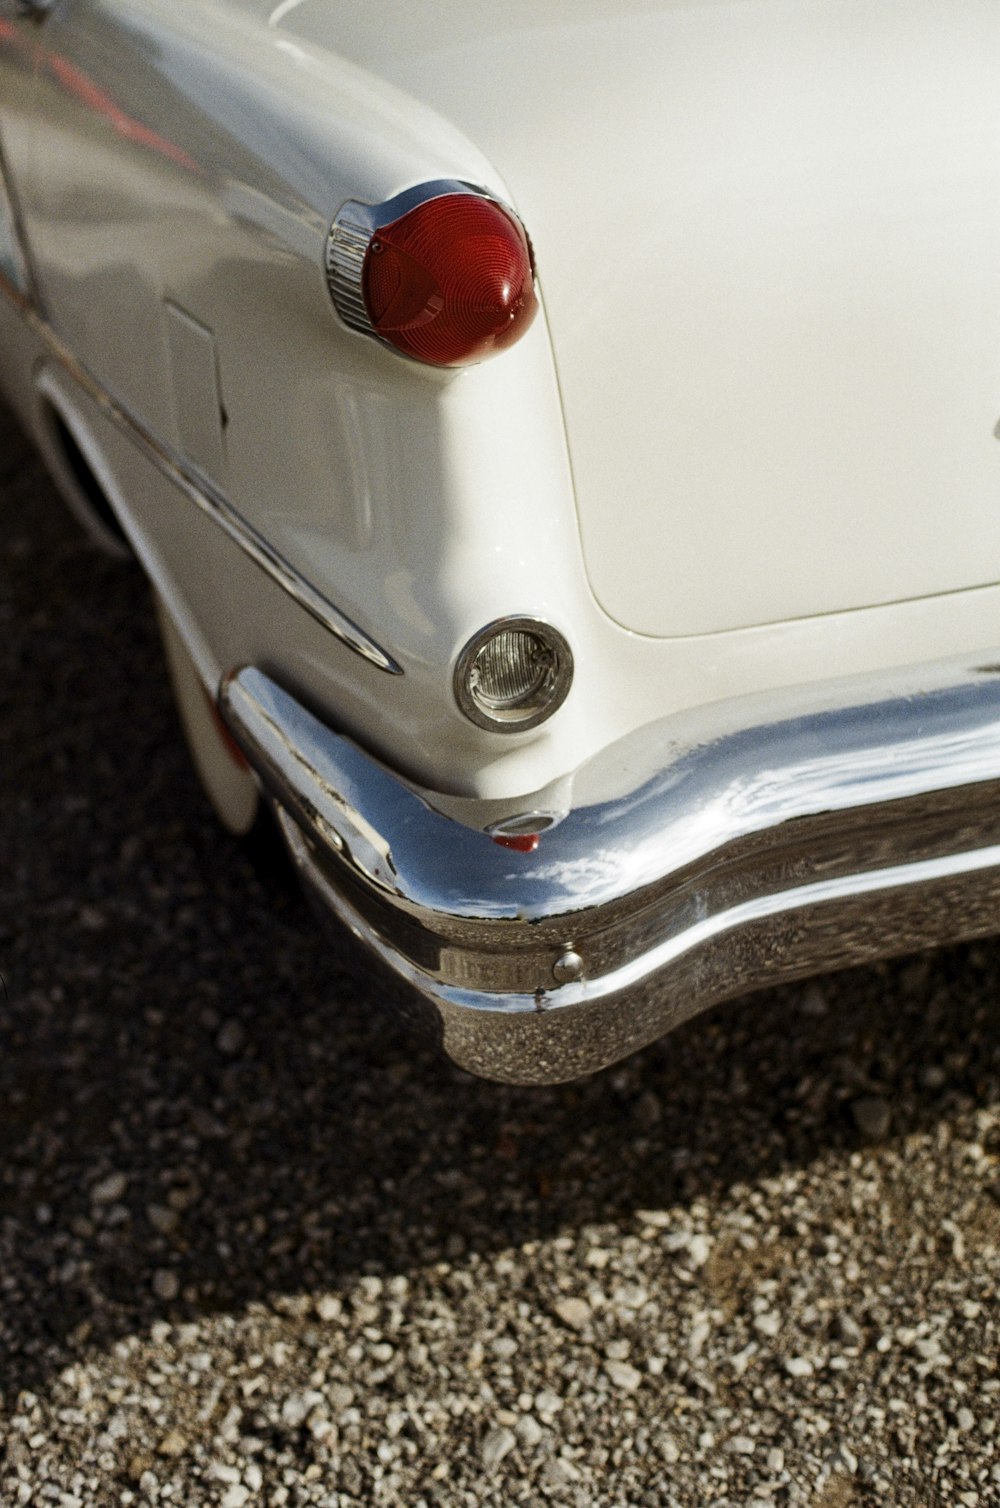 a close up of the tail end of an old car